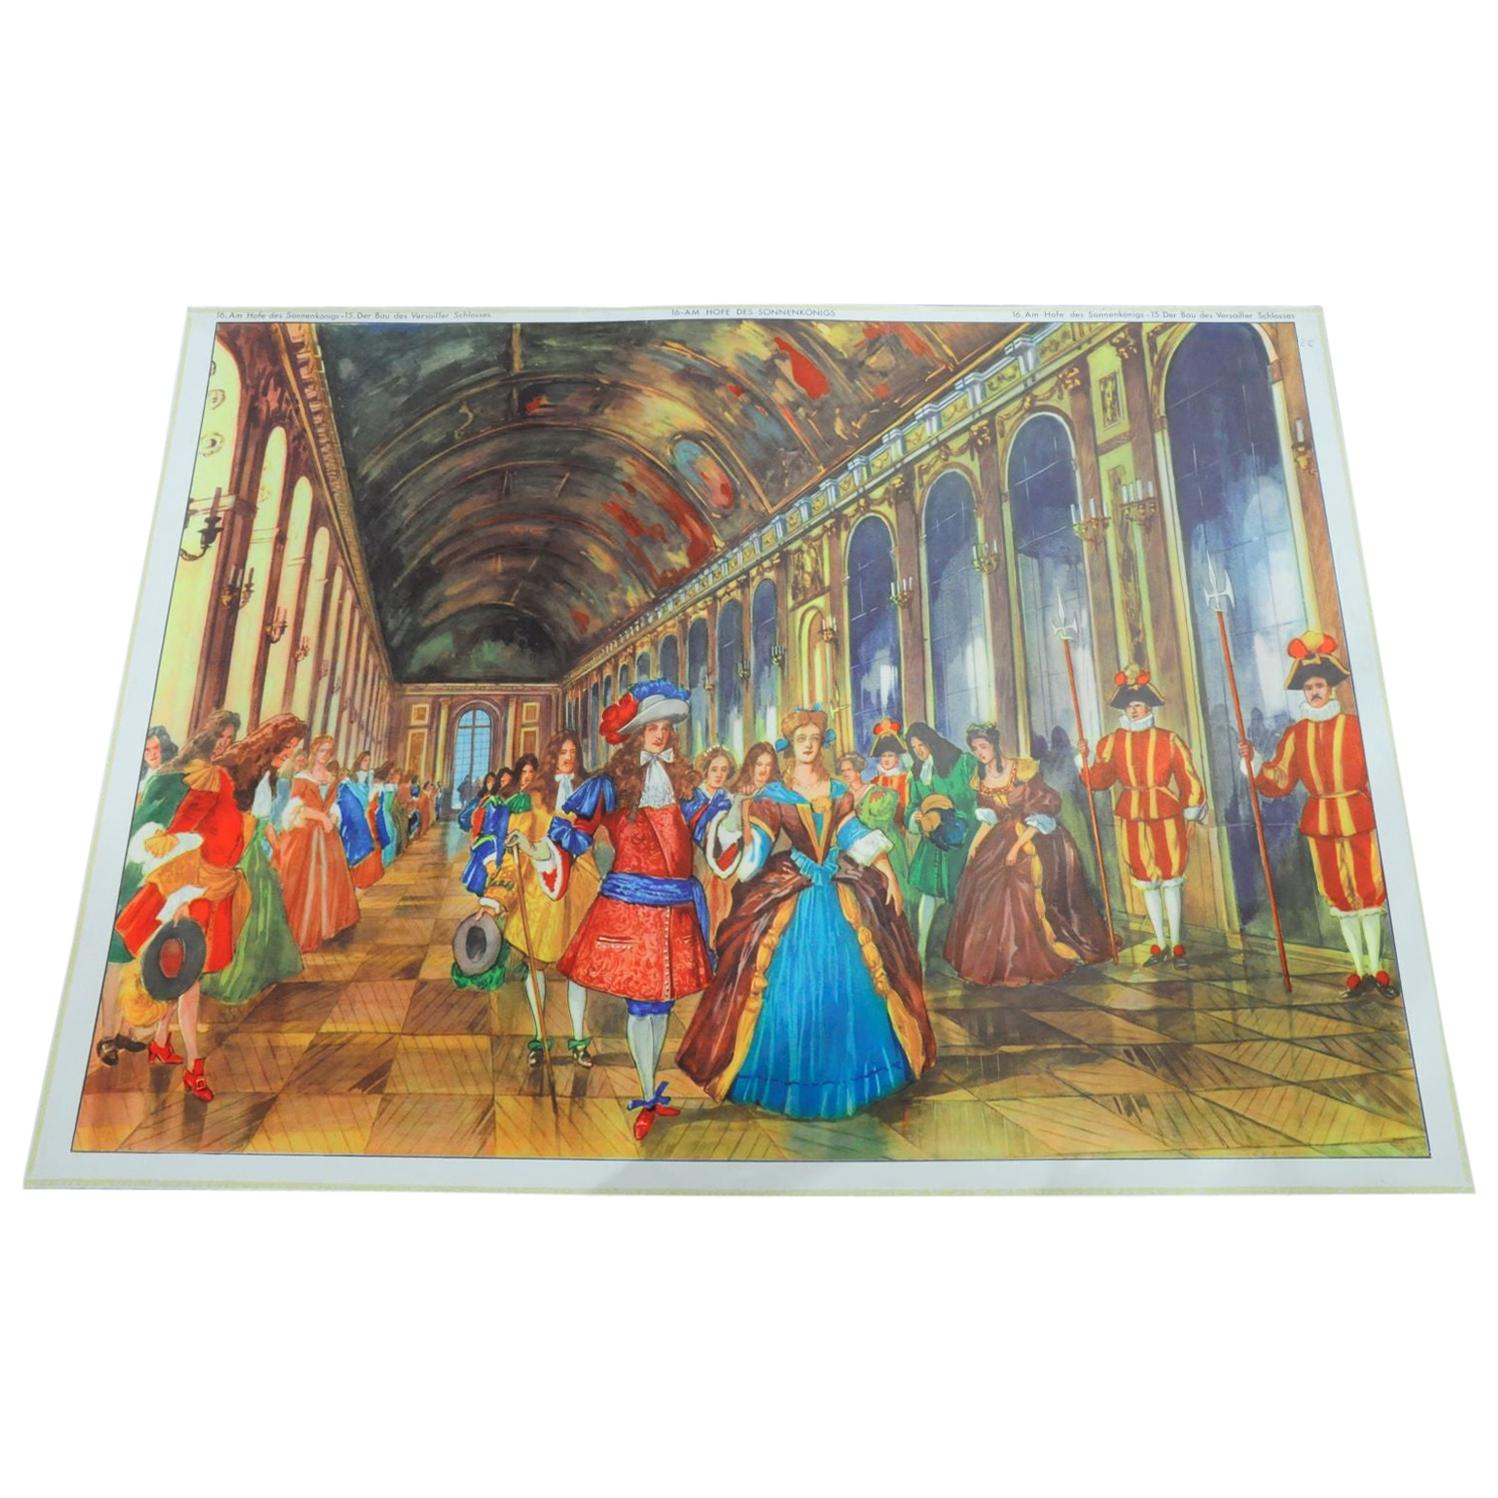 Vintage Double-Sided Wall Chart Build of Versailles Palace Life of Sun King For Sale